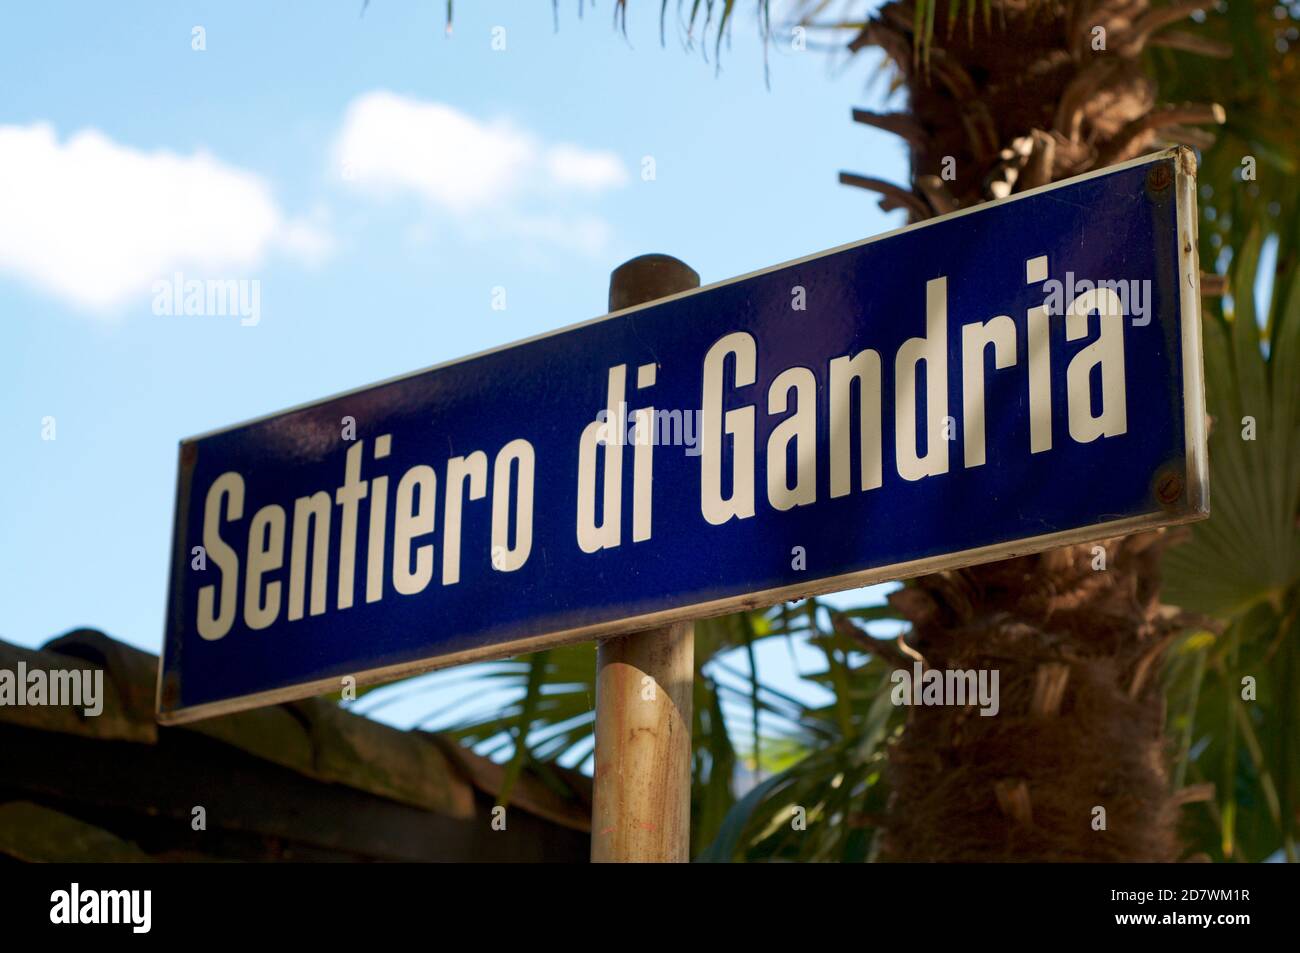 Close up of the sentiero di Gandria (Pathway of Gandria) sign hanging on the walking trail. Gandria is a famous touristic village near Lugano in Switz Stock Photo